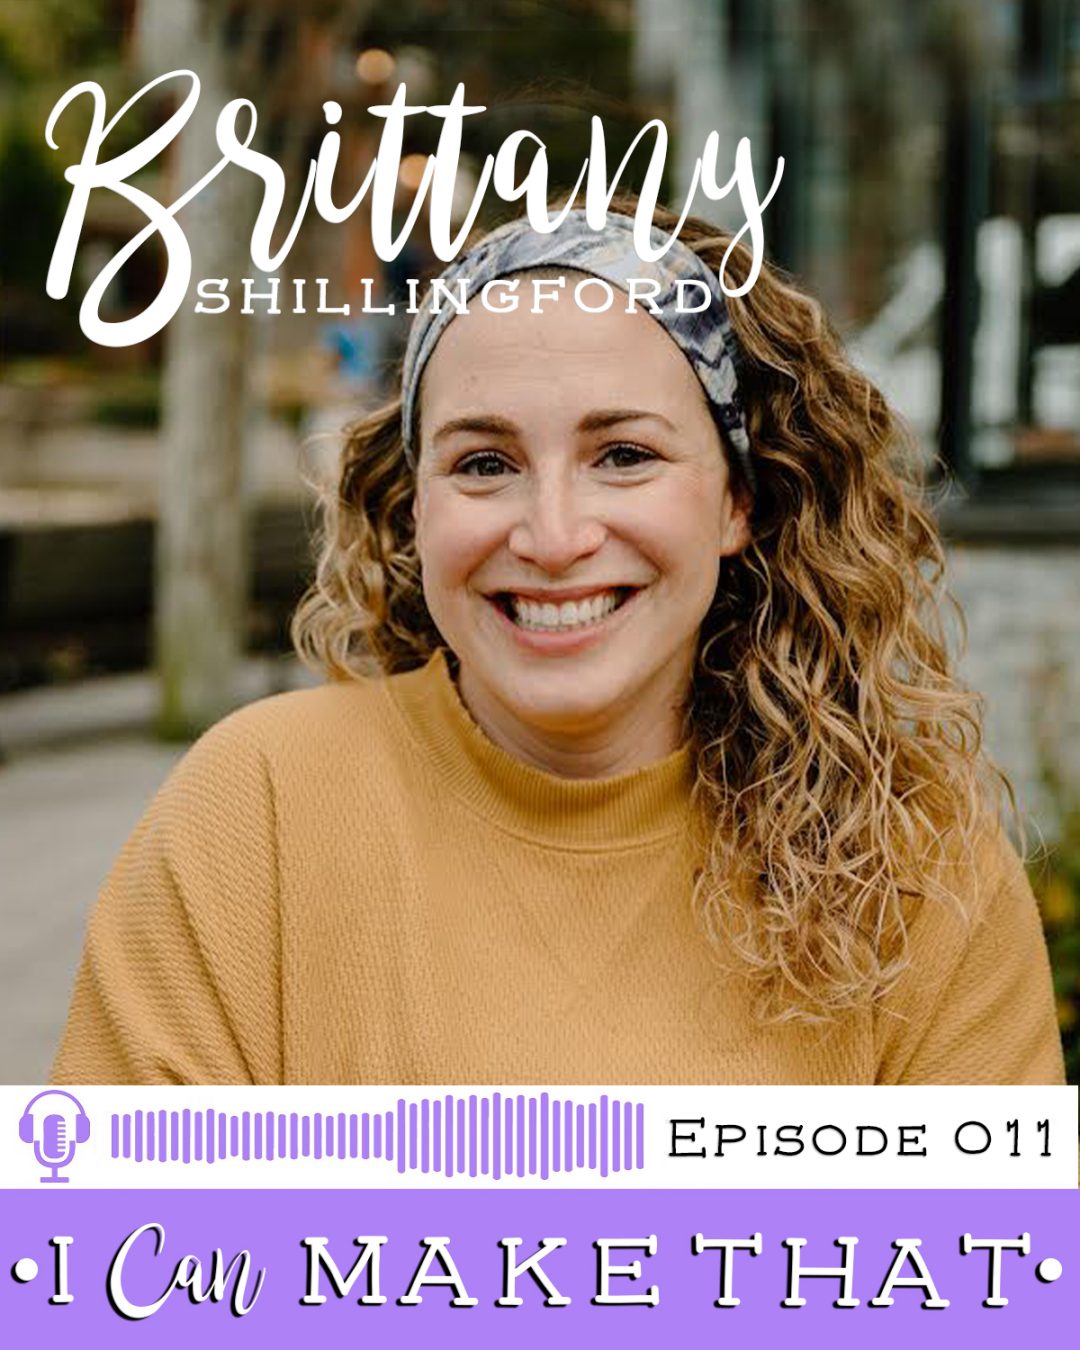 I Can Make That Podcast | Episode 011 :: Brittany Shillingford, BizzyBCrafts